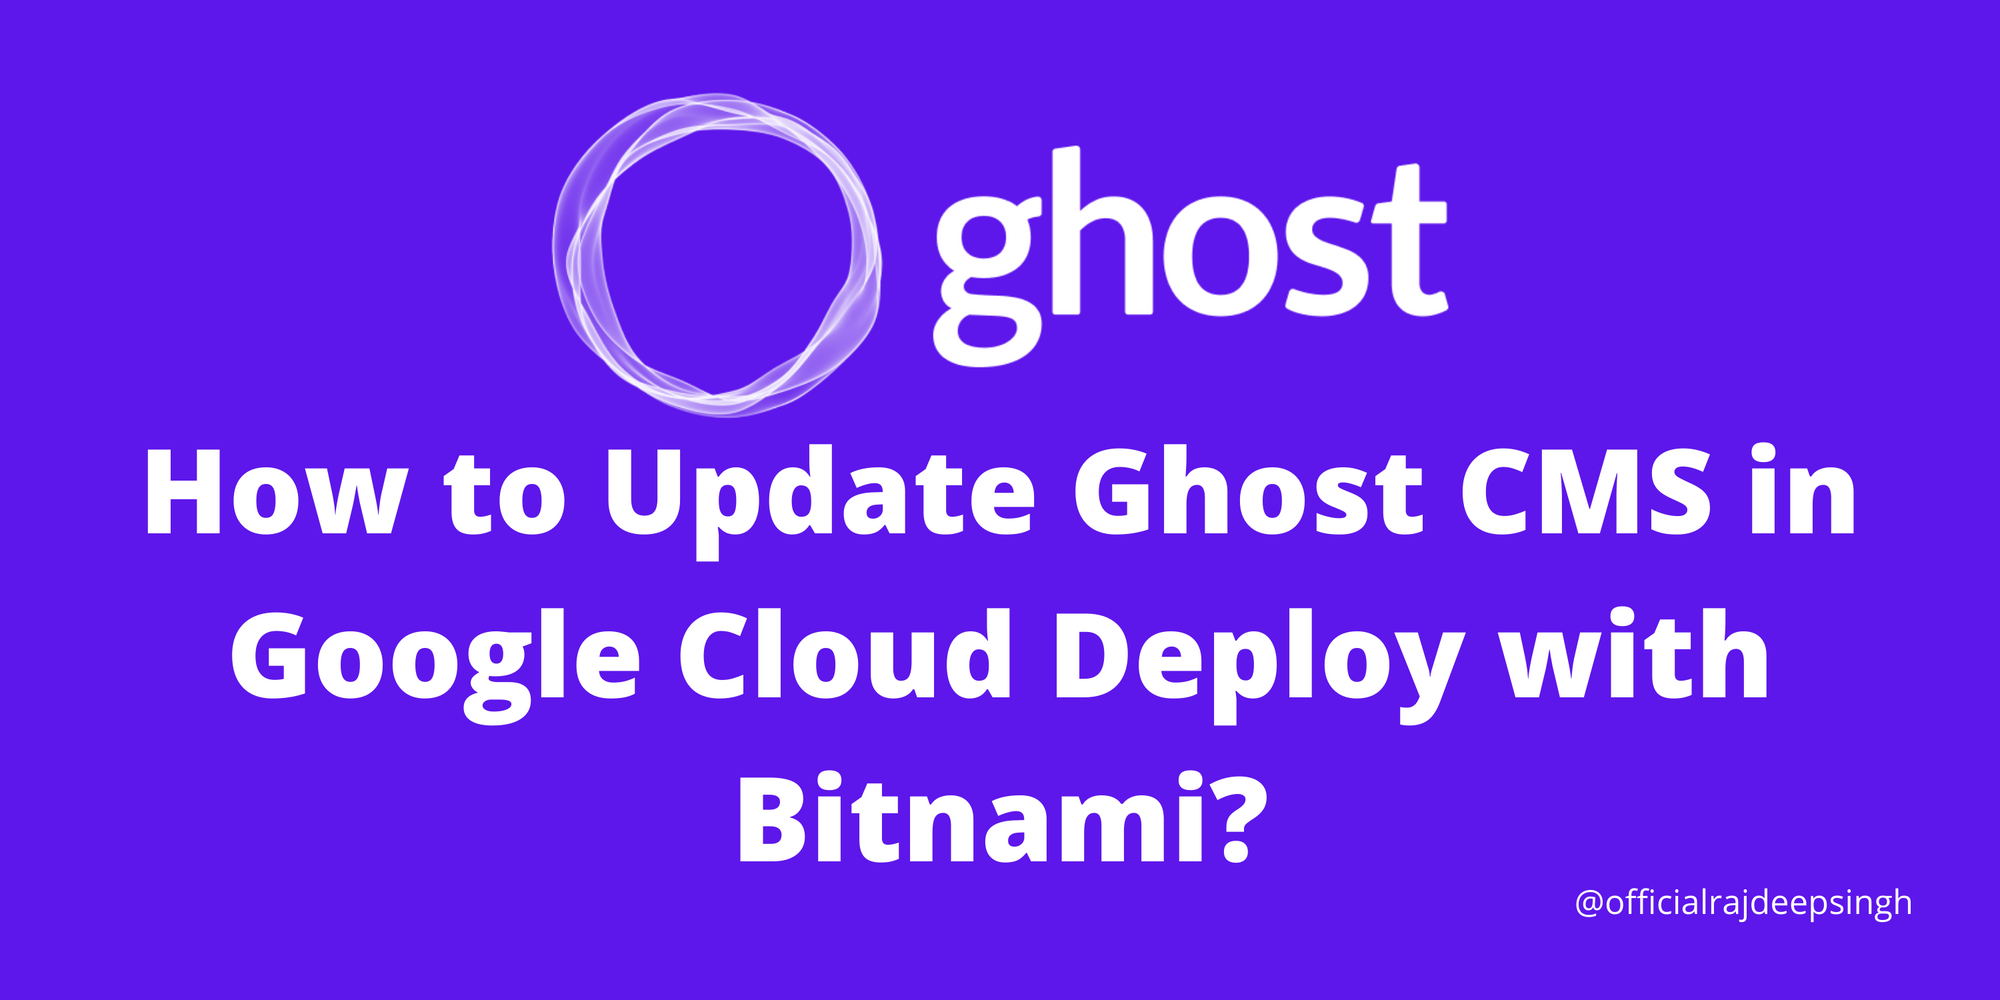 How to Update Ghost CMS in Google Cloud Deploy with Bitnami?